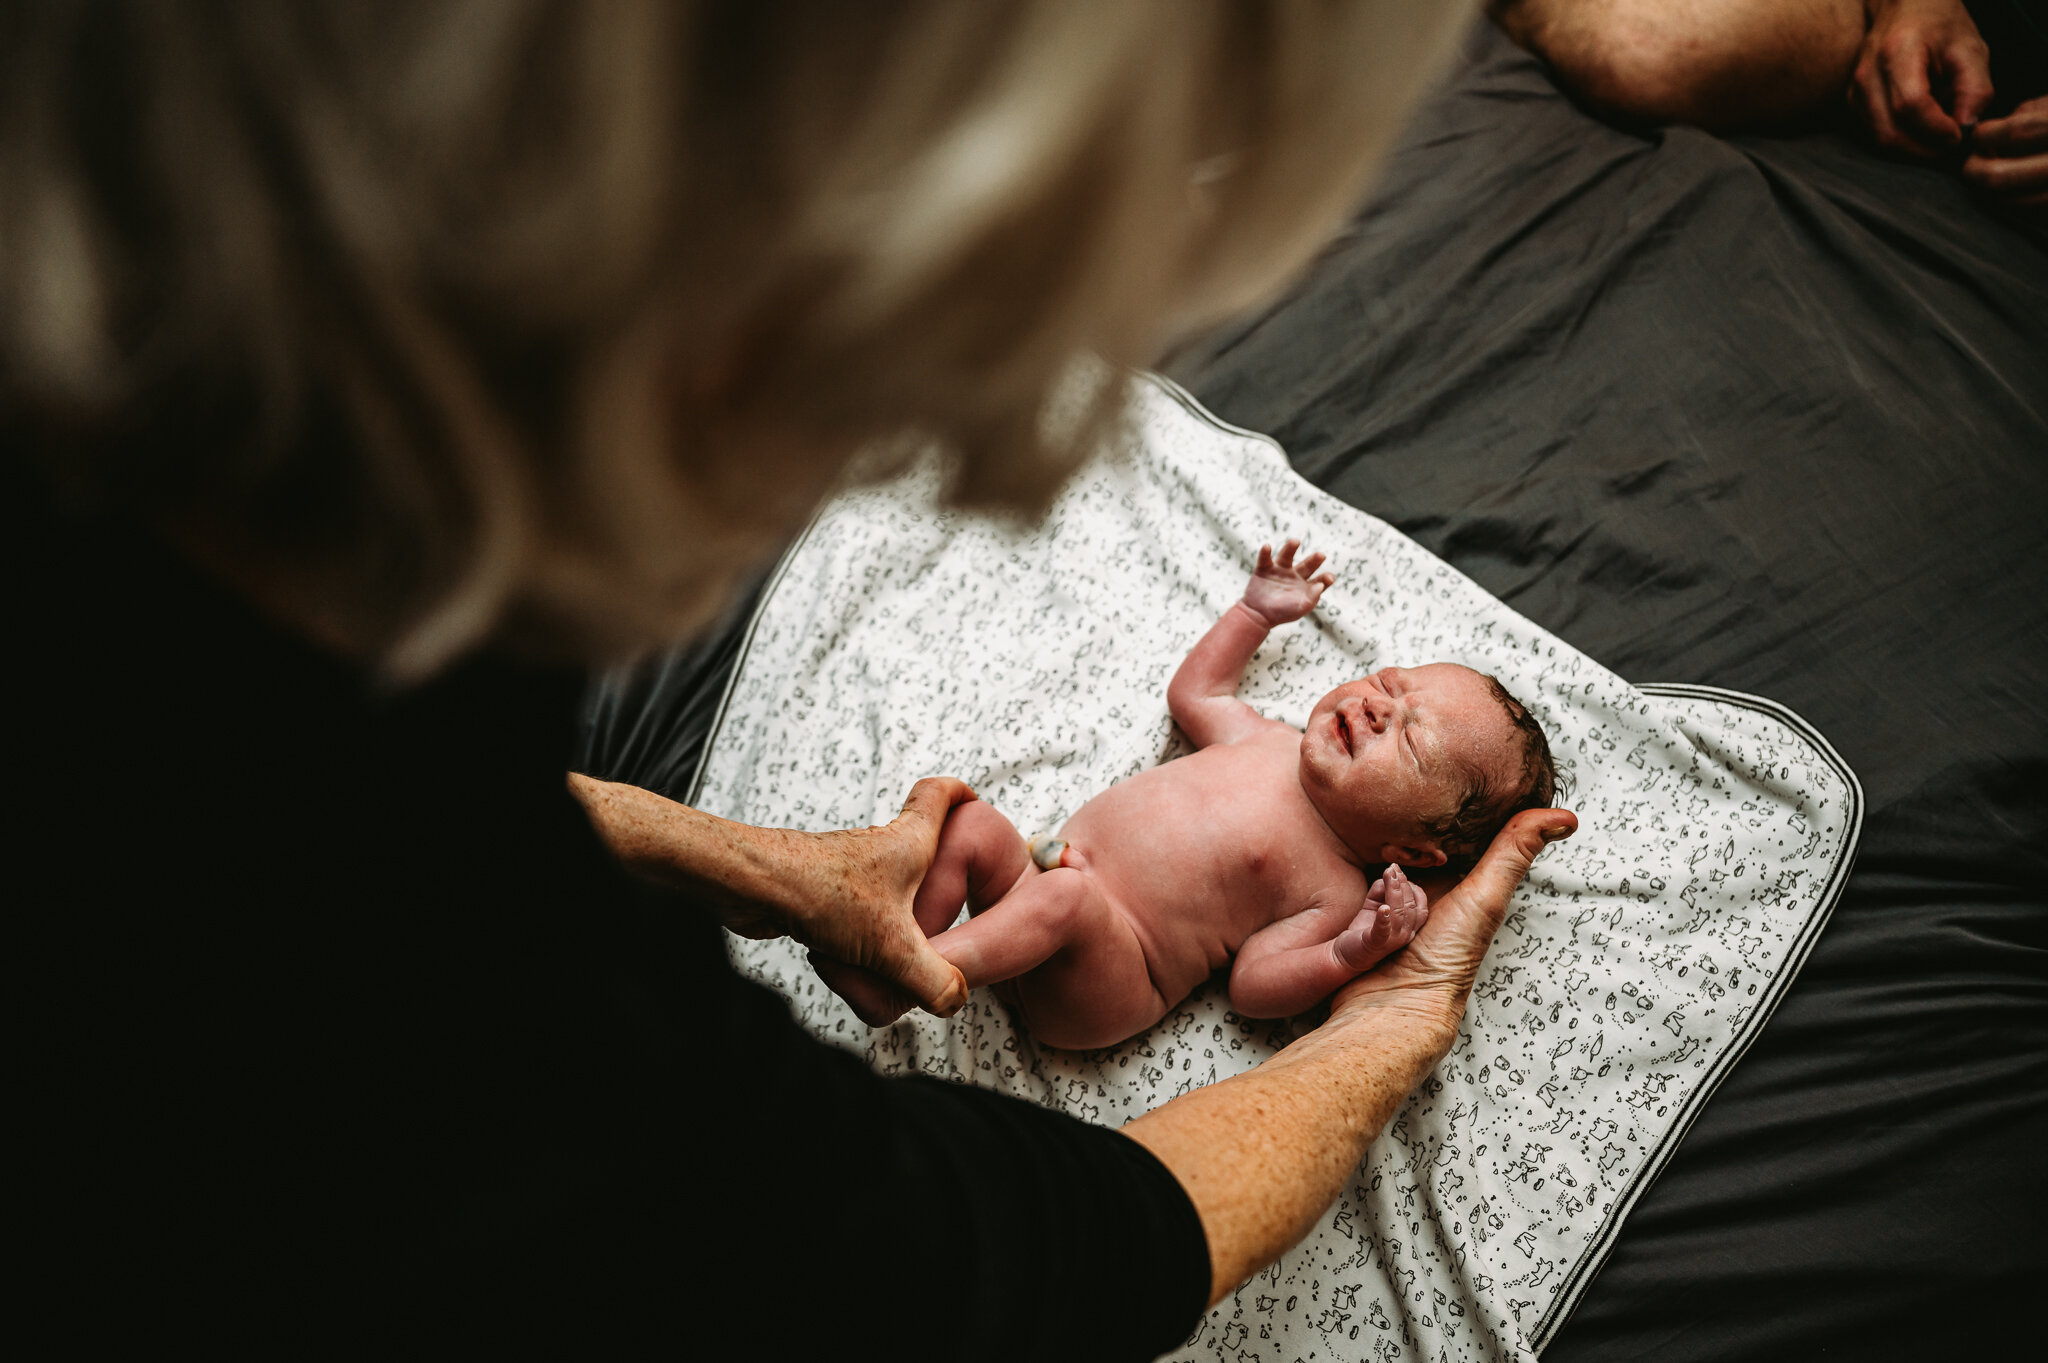 One of the most beautiful parts of a home birth is the service to the family. Its accommodating and respectful. Newborn exams on the bed while the family rests and participates. 

Midwife: @chesapeakemidwifery 

#newbornexam #miwdwiferycare #midwife 